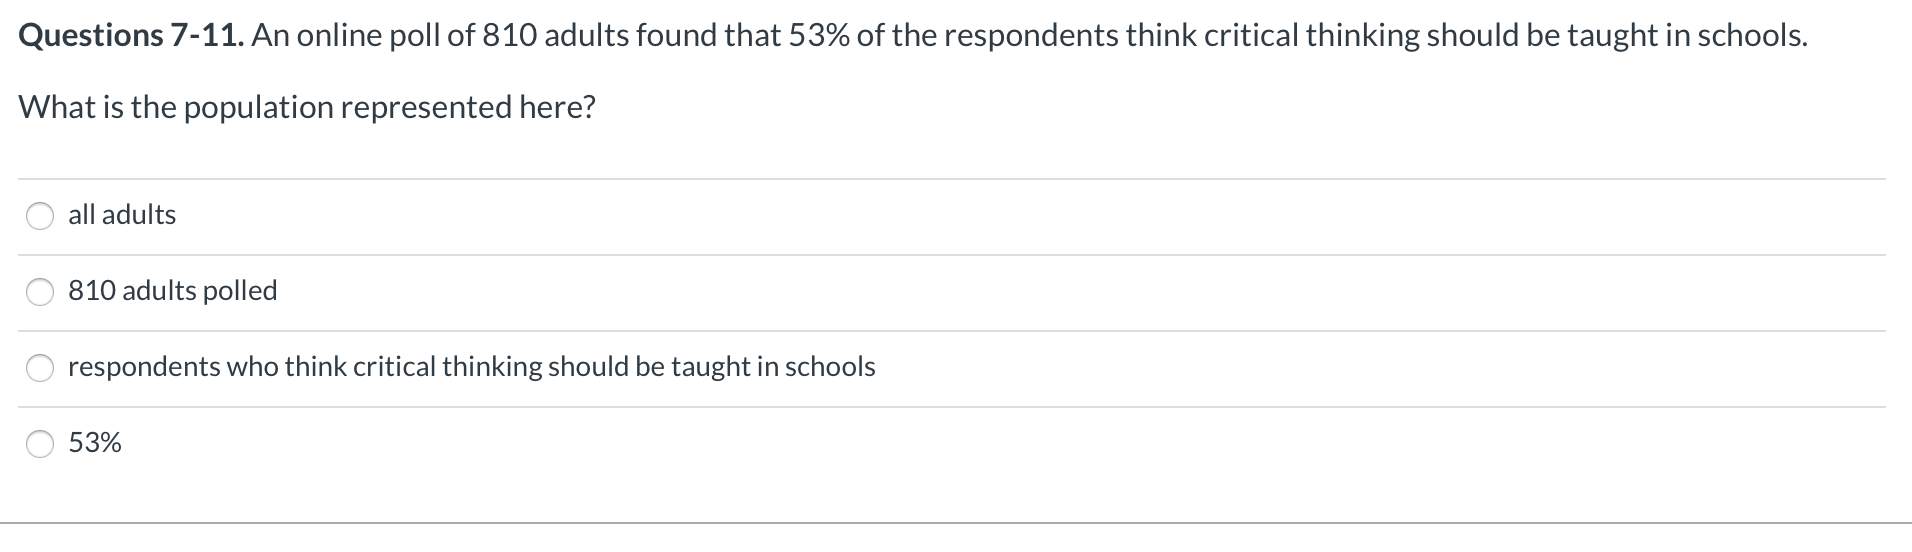 Questions 7-11. An online poll of 810 adults found that 53% of the respondents think critical thinking should be taught in schools.
What is the population represented here?
all adults
810 adults polled
respondents who think critical thinking should be taught in schools
53%
